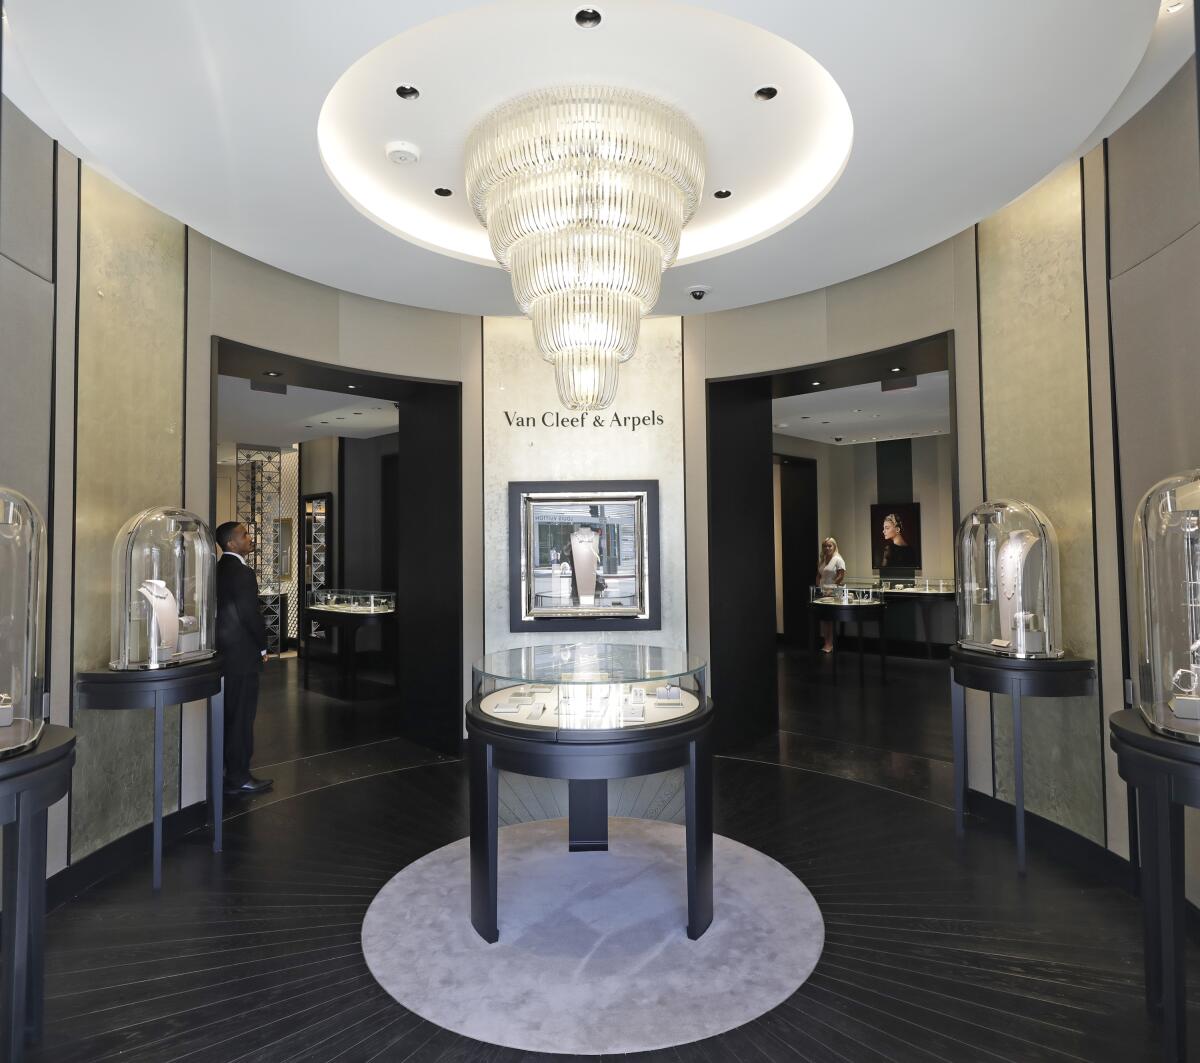 The renovated Van Cleef & Arpels store on Rodeo Drive in Beverly Hills